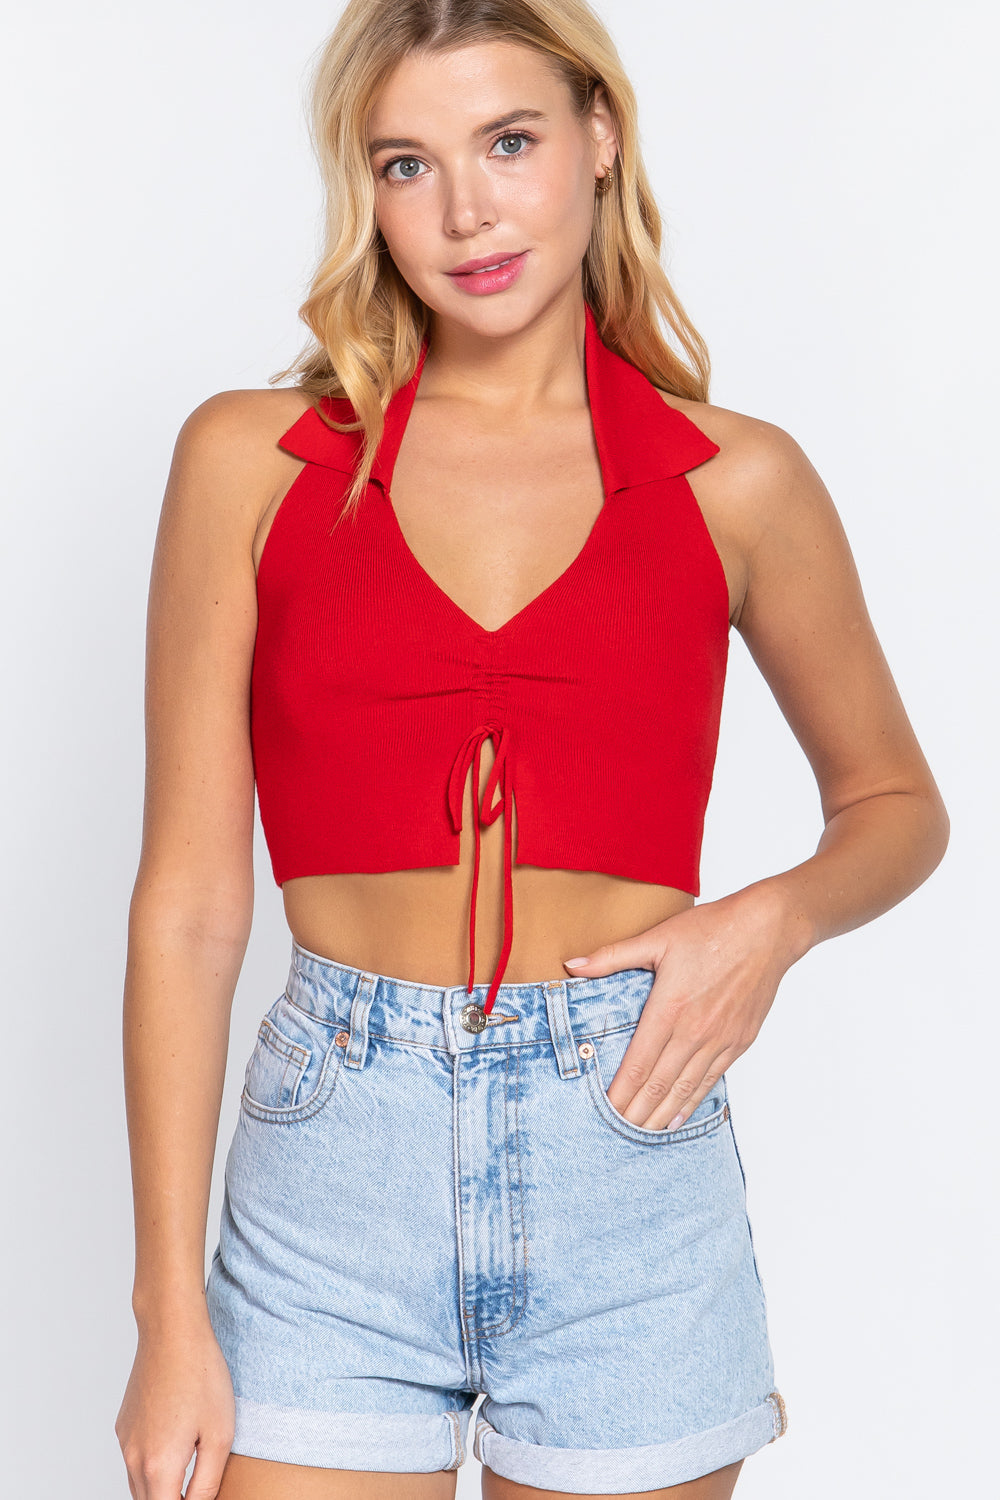 RED GLOW Halter Ruched Cropped Knit Top -6 colors - Ships from the US - women's halter top at TFC&H Co.